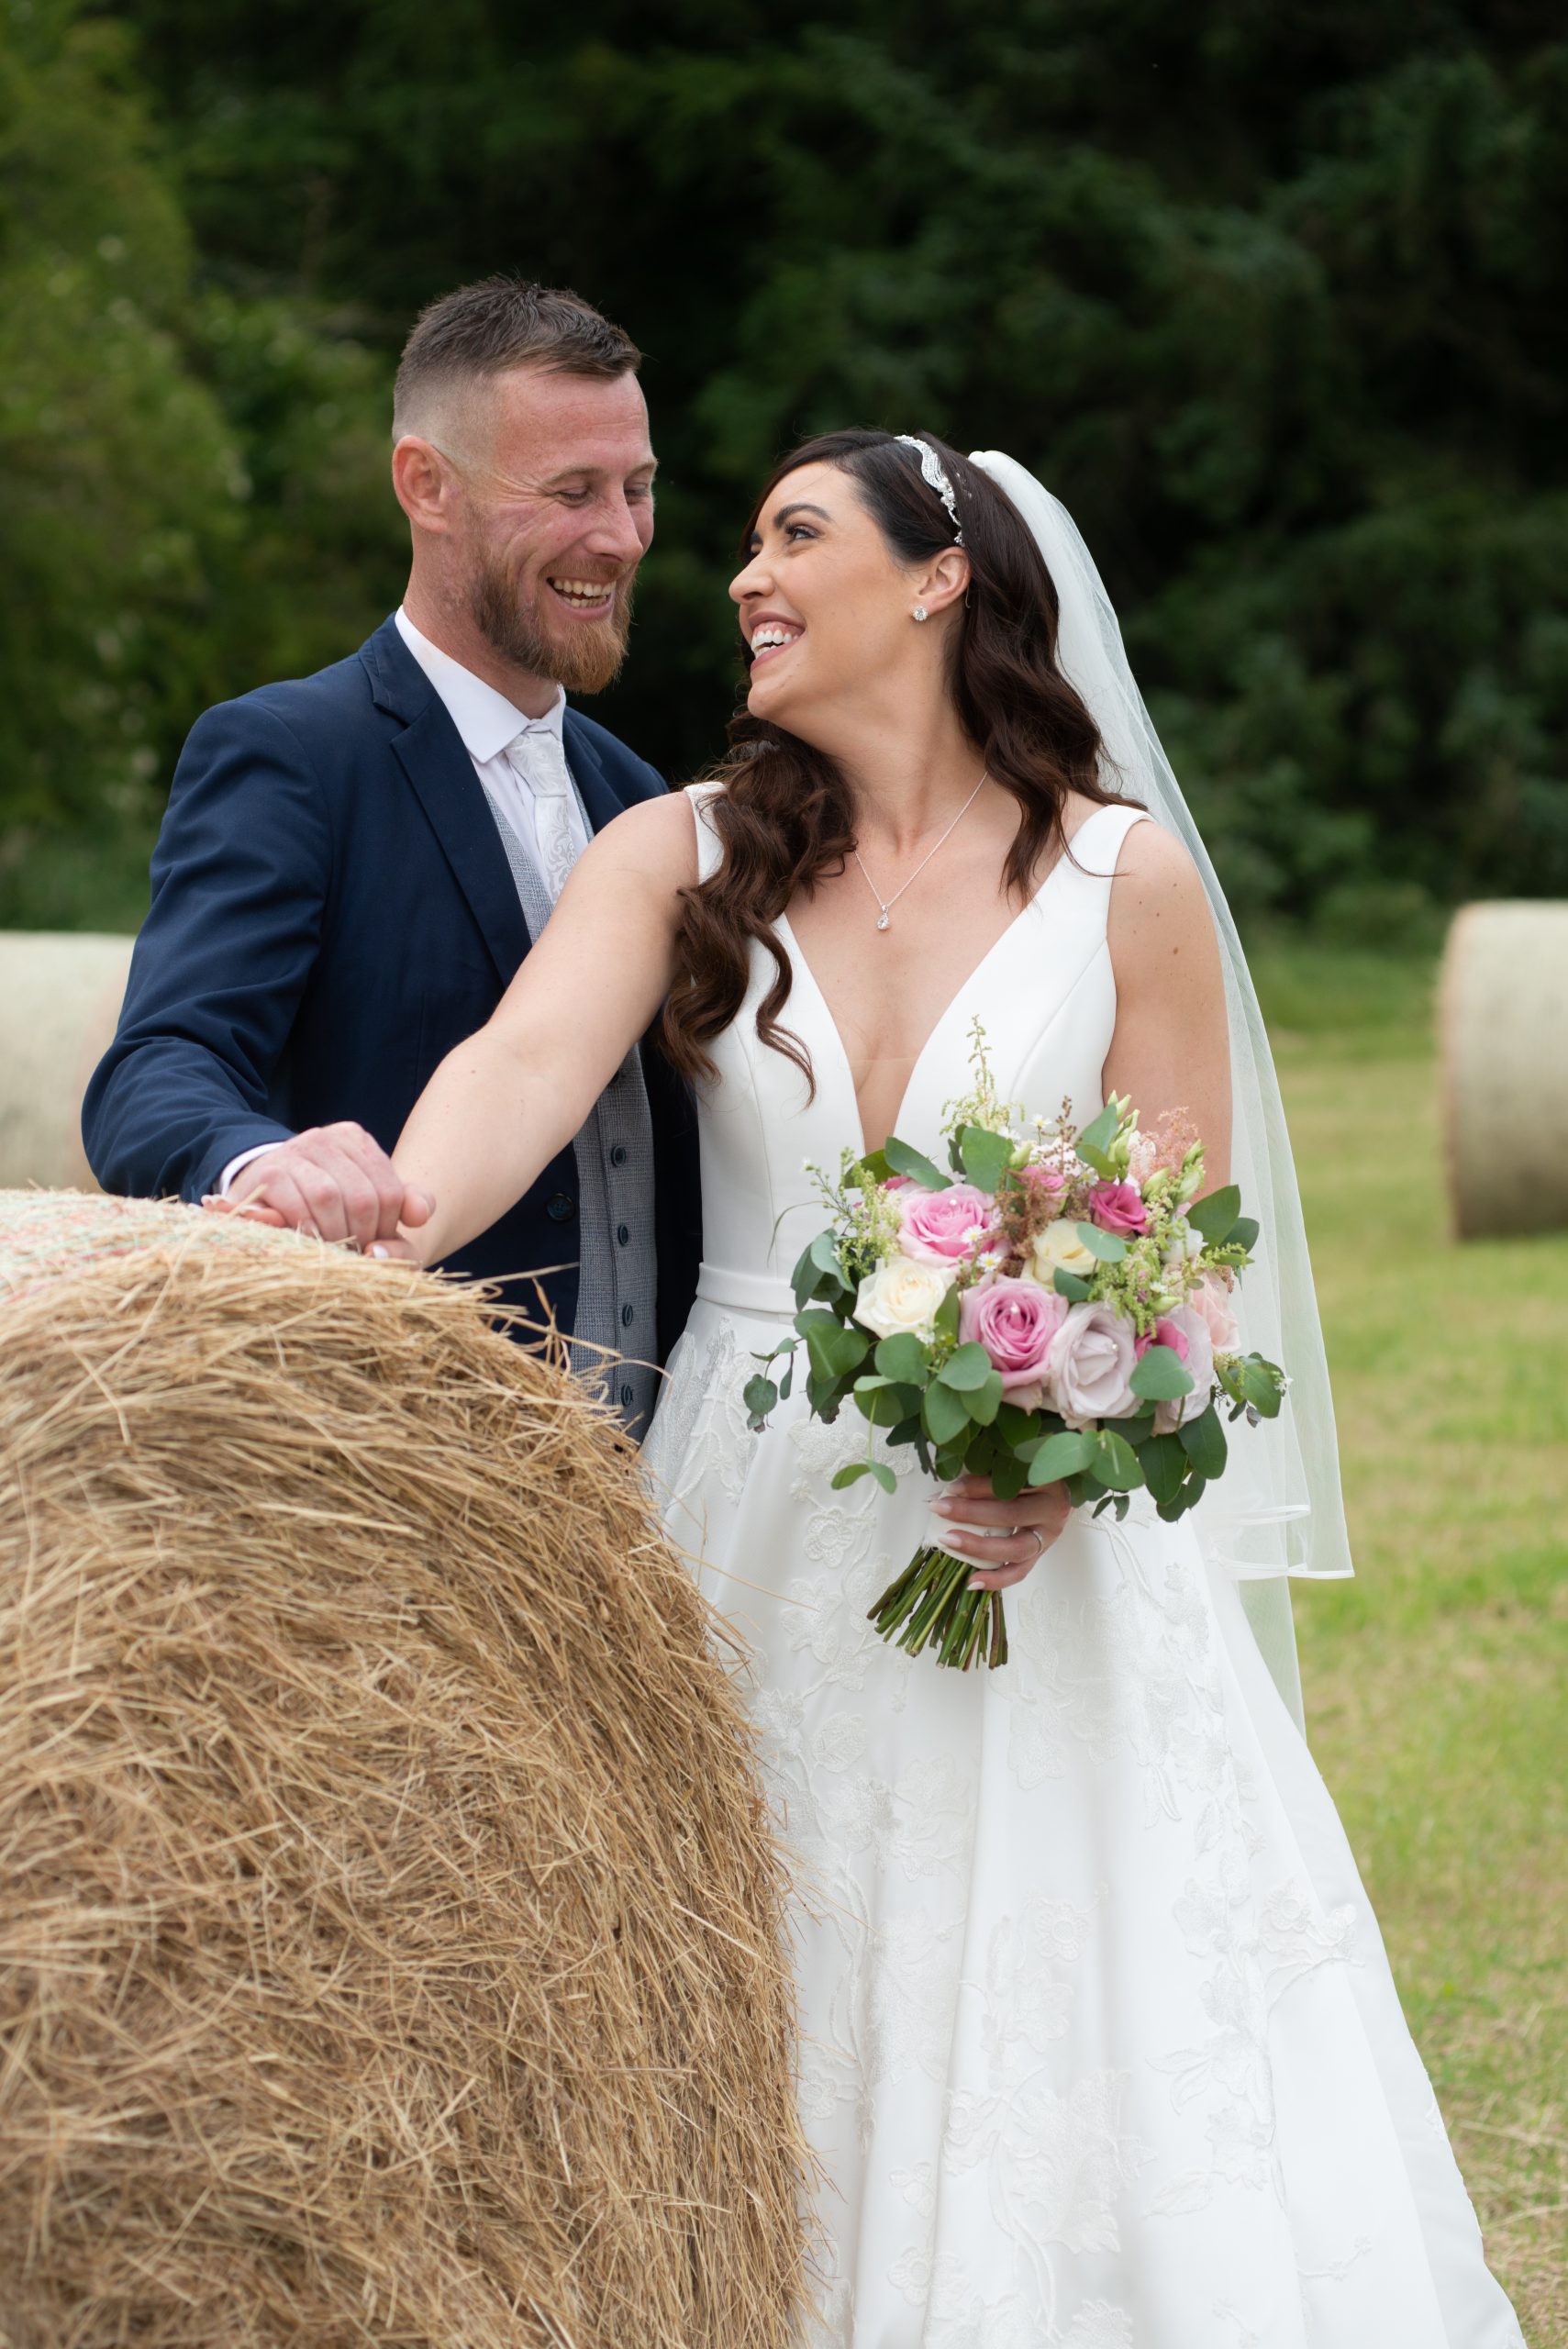 Couple smiling by bale of hay